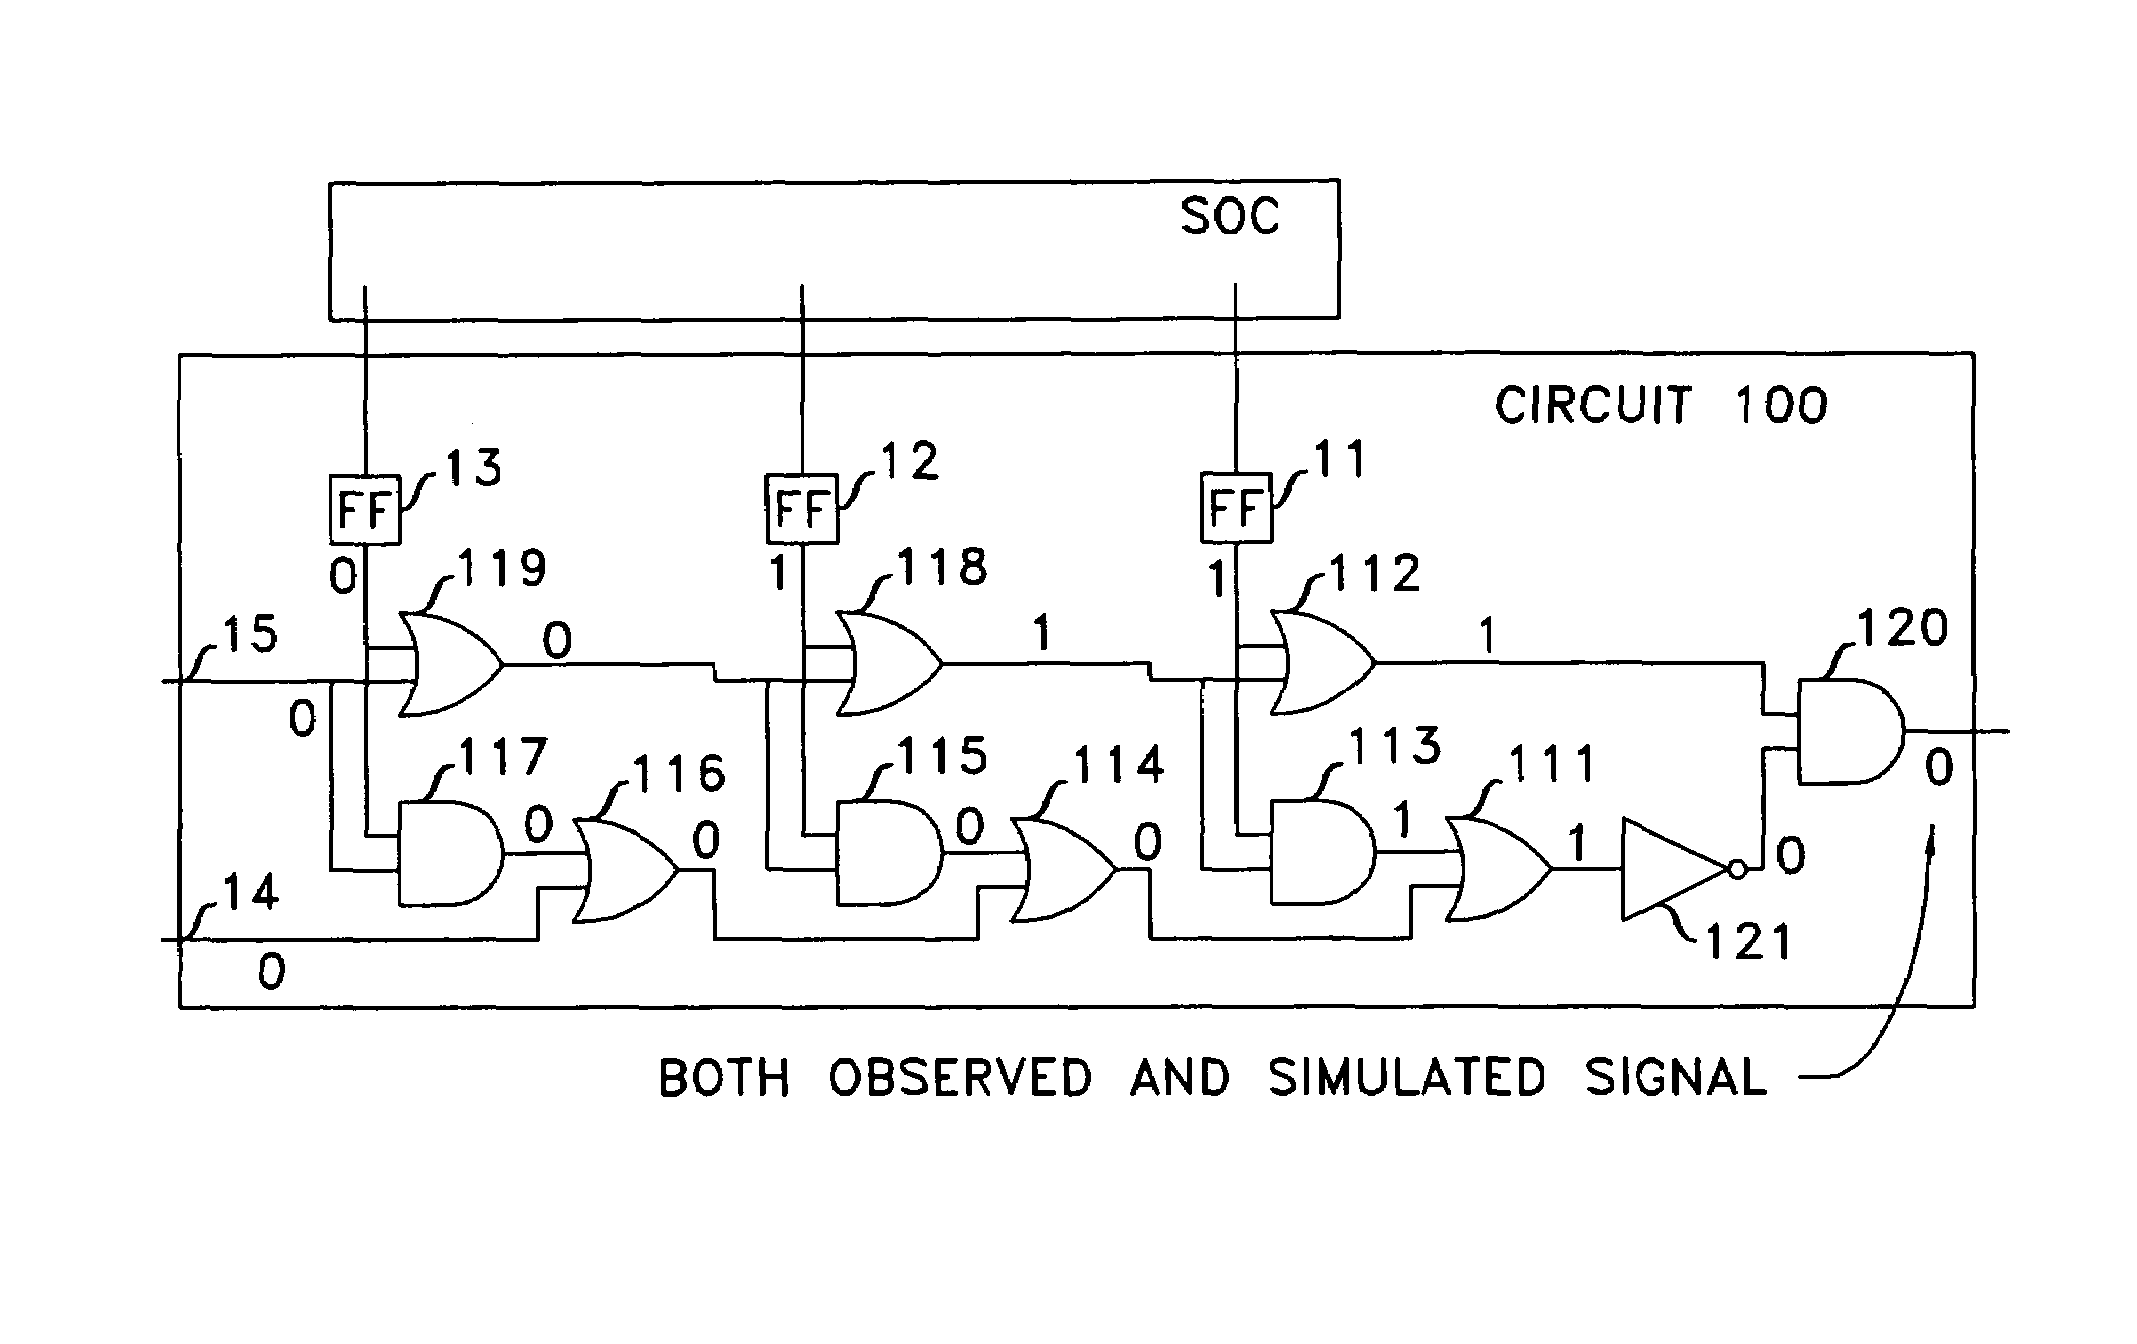 Method to locate logic errors and defects in digital circuits